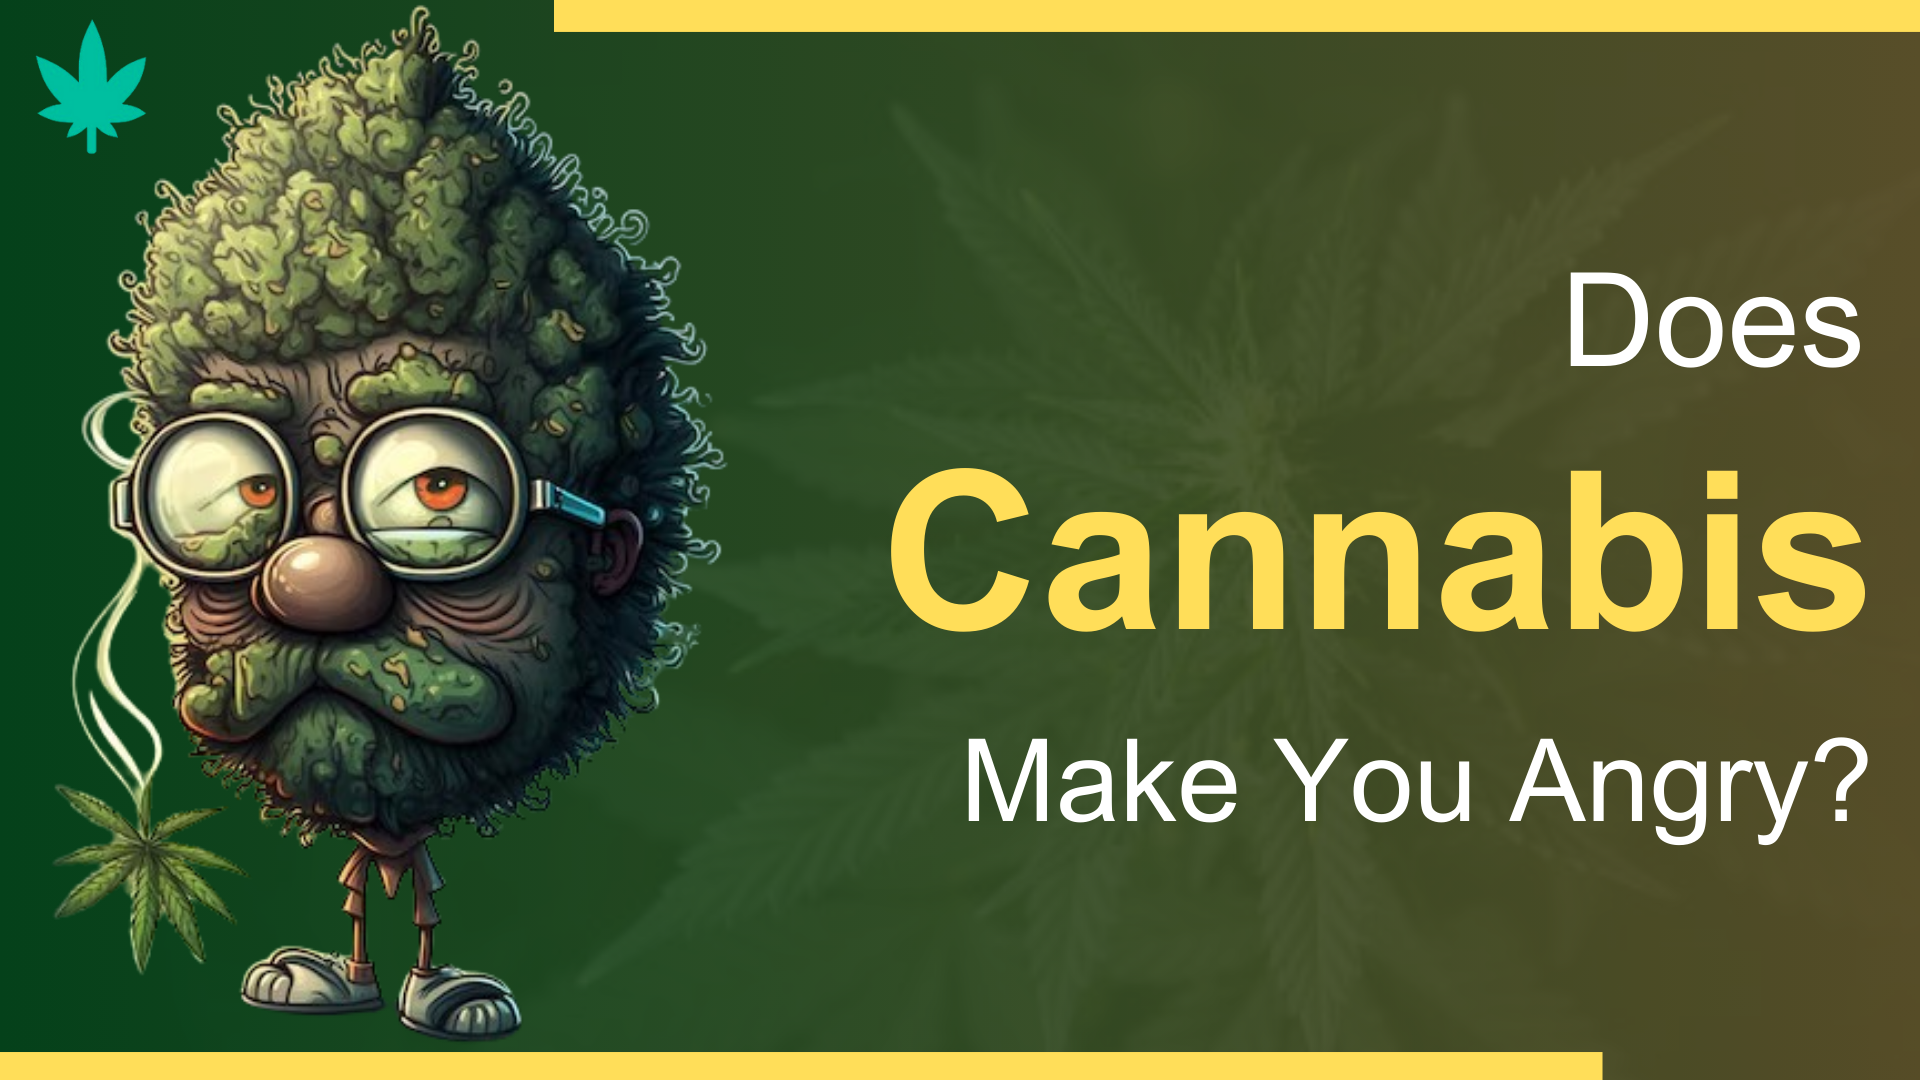 Does Cannabis Make You Angry?